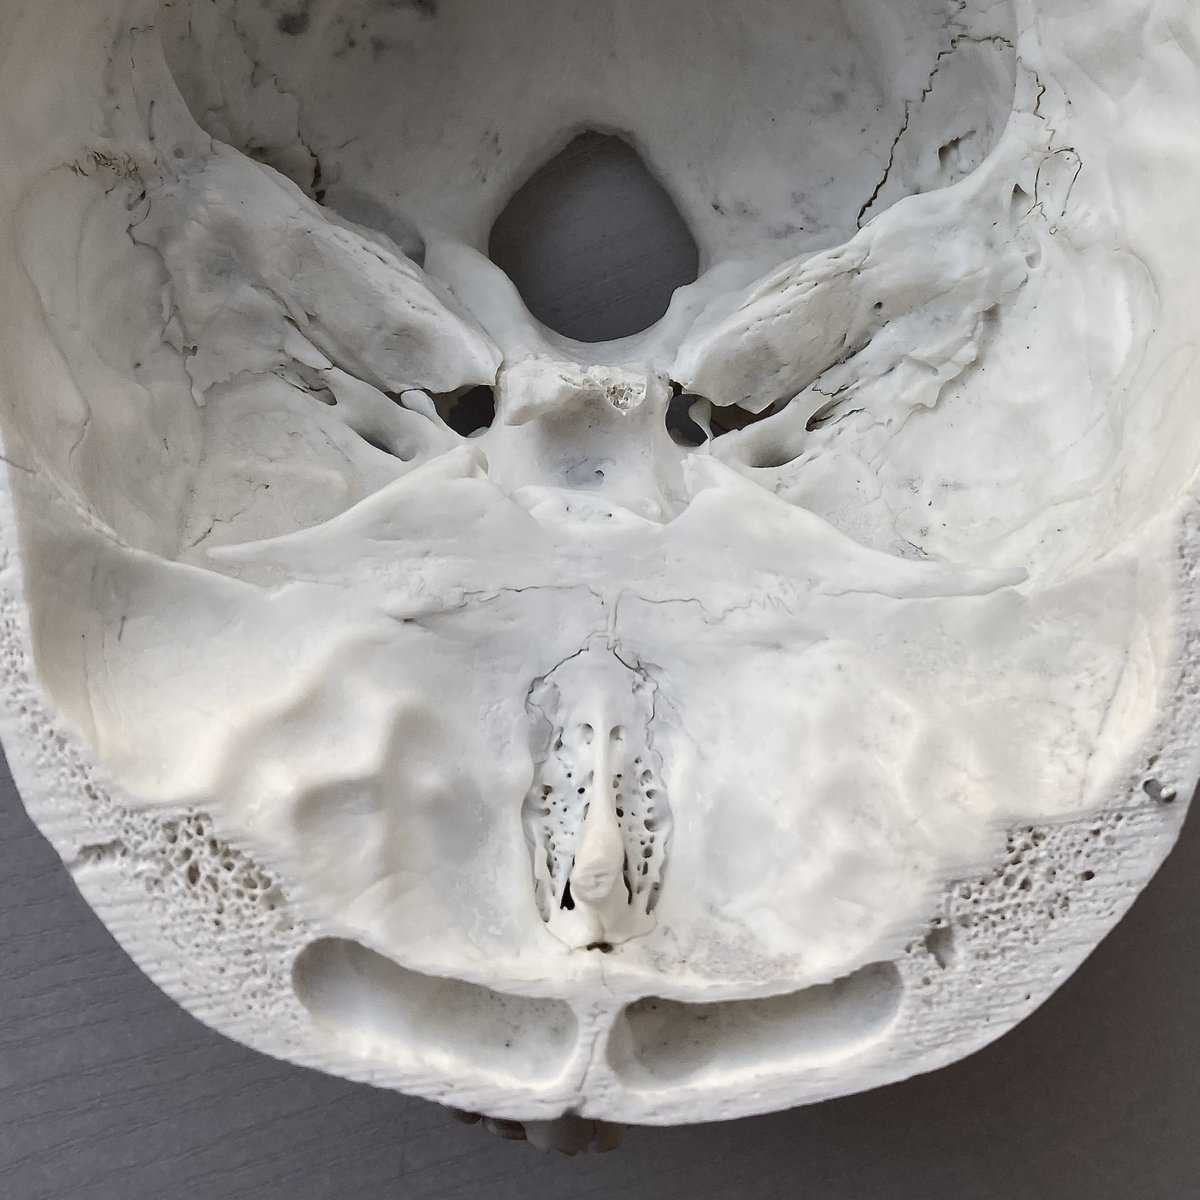 The Human Frontal Sinus: We Need It!
 
#forensic #forensicanthropology #frontalsinus #anatomy #physiology #clinicalresearch #surgicalinterventions #diagnostics #forensicidentification #forensicscience #skullanatomy #medicalresearch #vocalresonance #airconditioning #histology